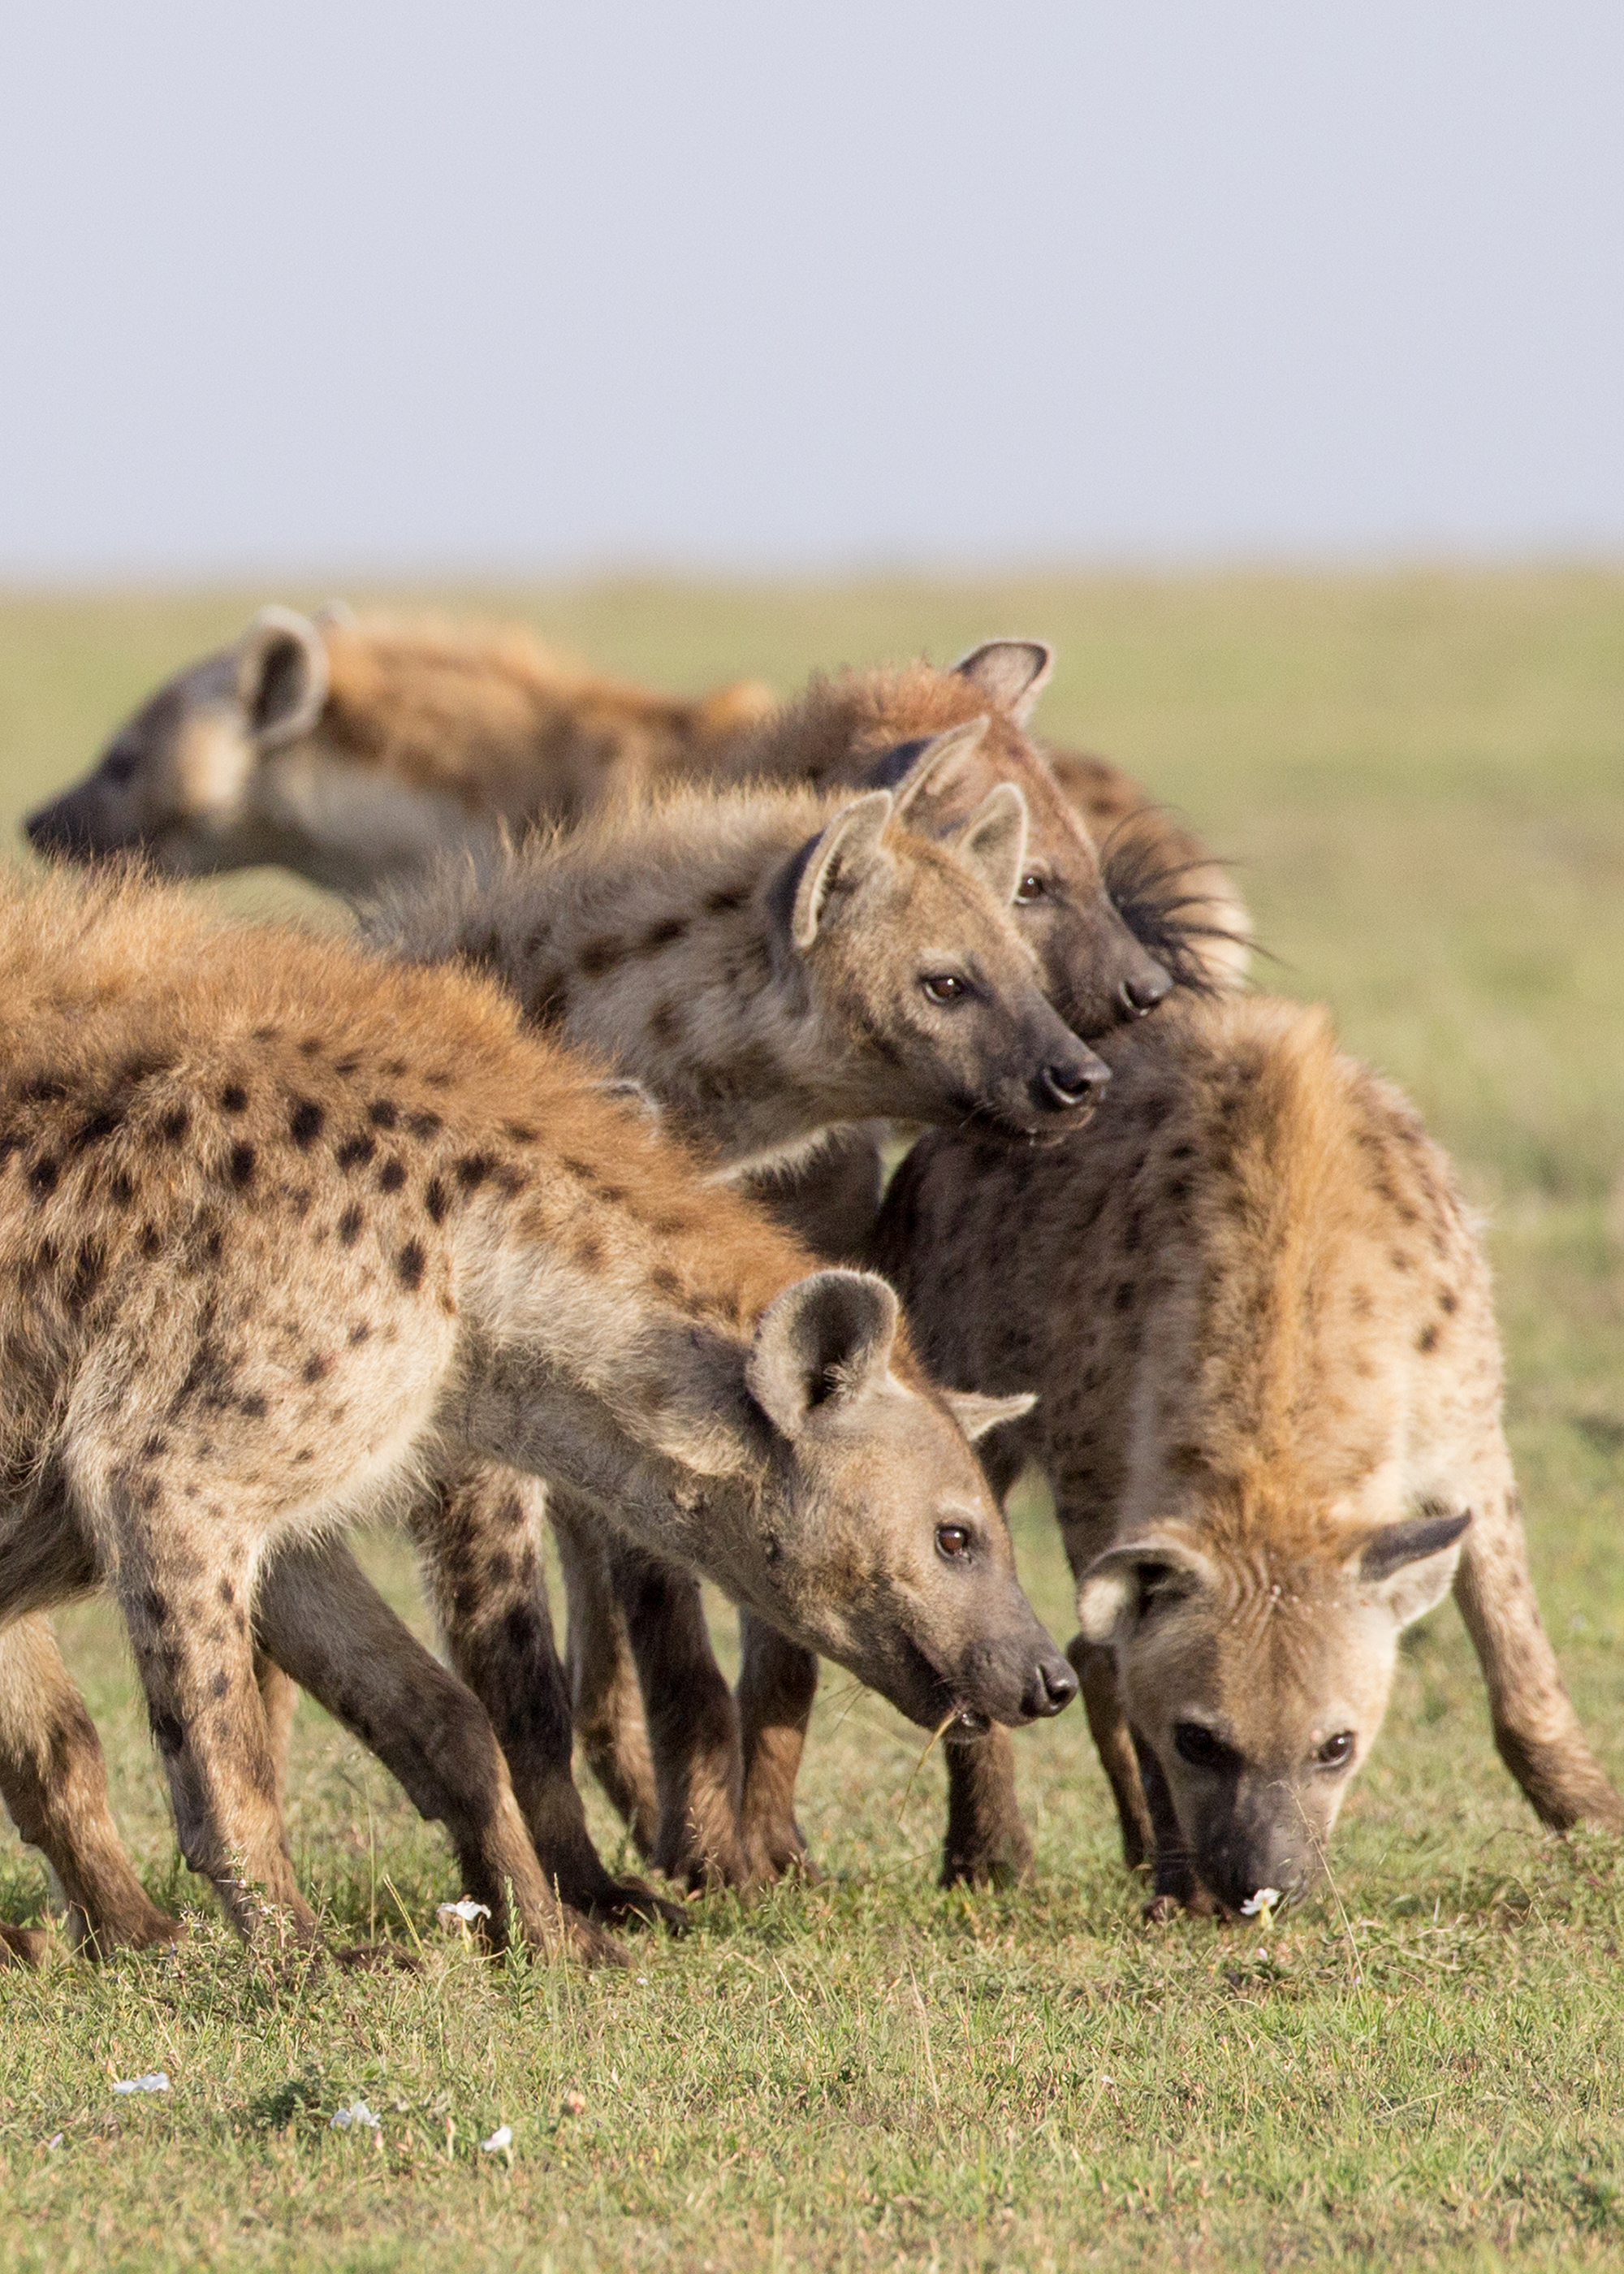 A photo shows a group of several spotted hyenas — animals with golden fur dotted with darker spots.